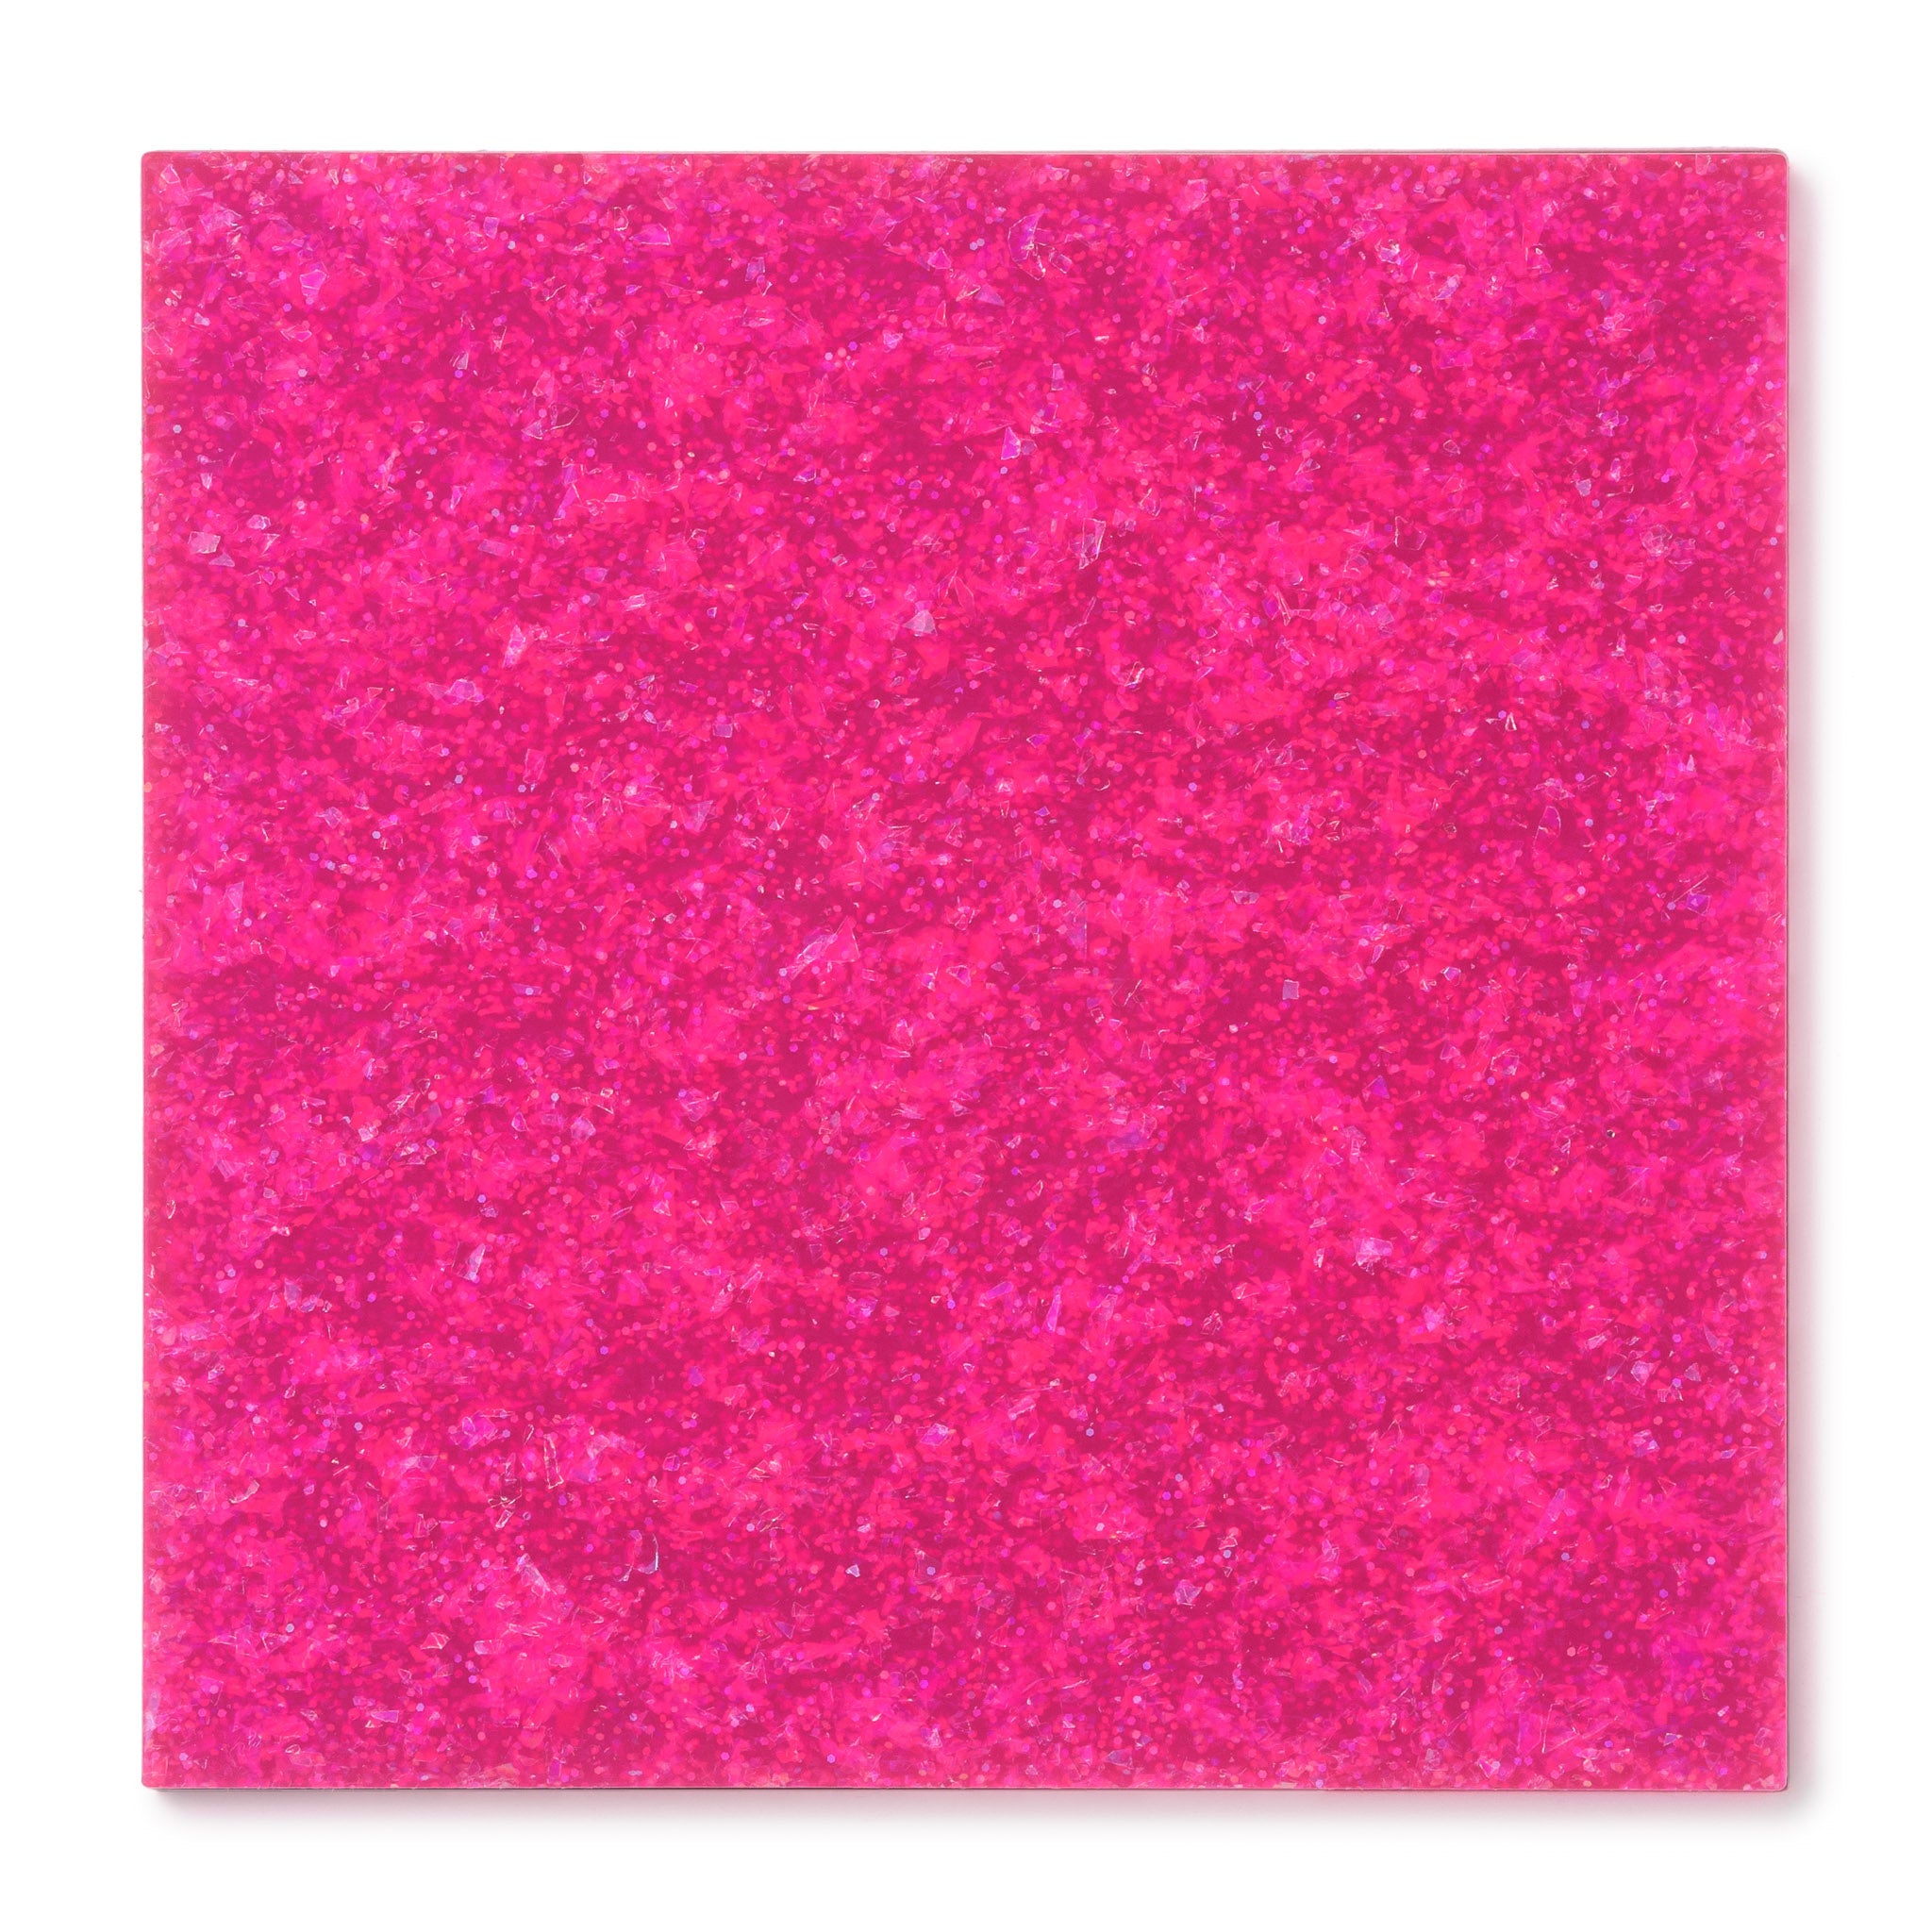 Neon Pink Colored Glitter Acrylic Sheet, Swatch View